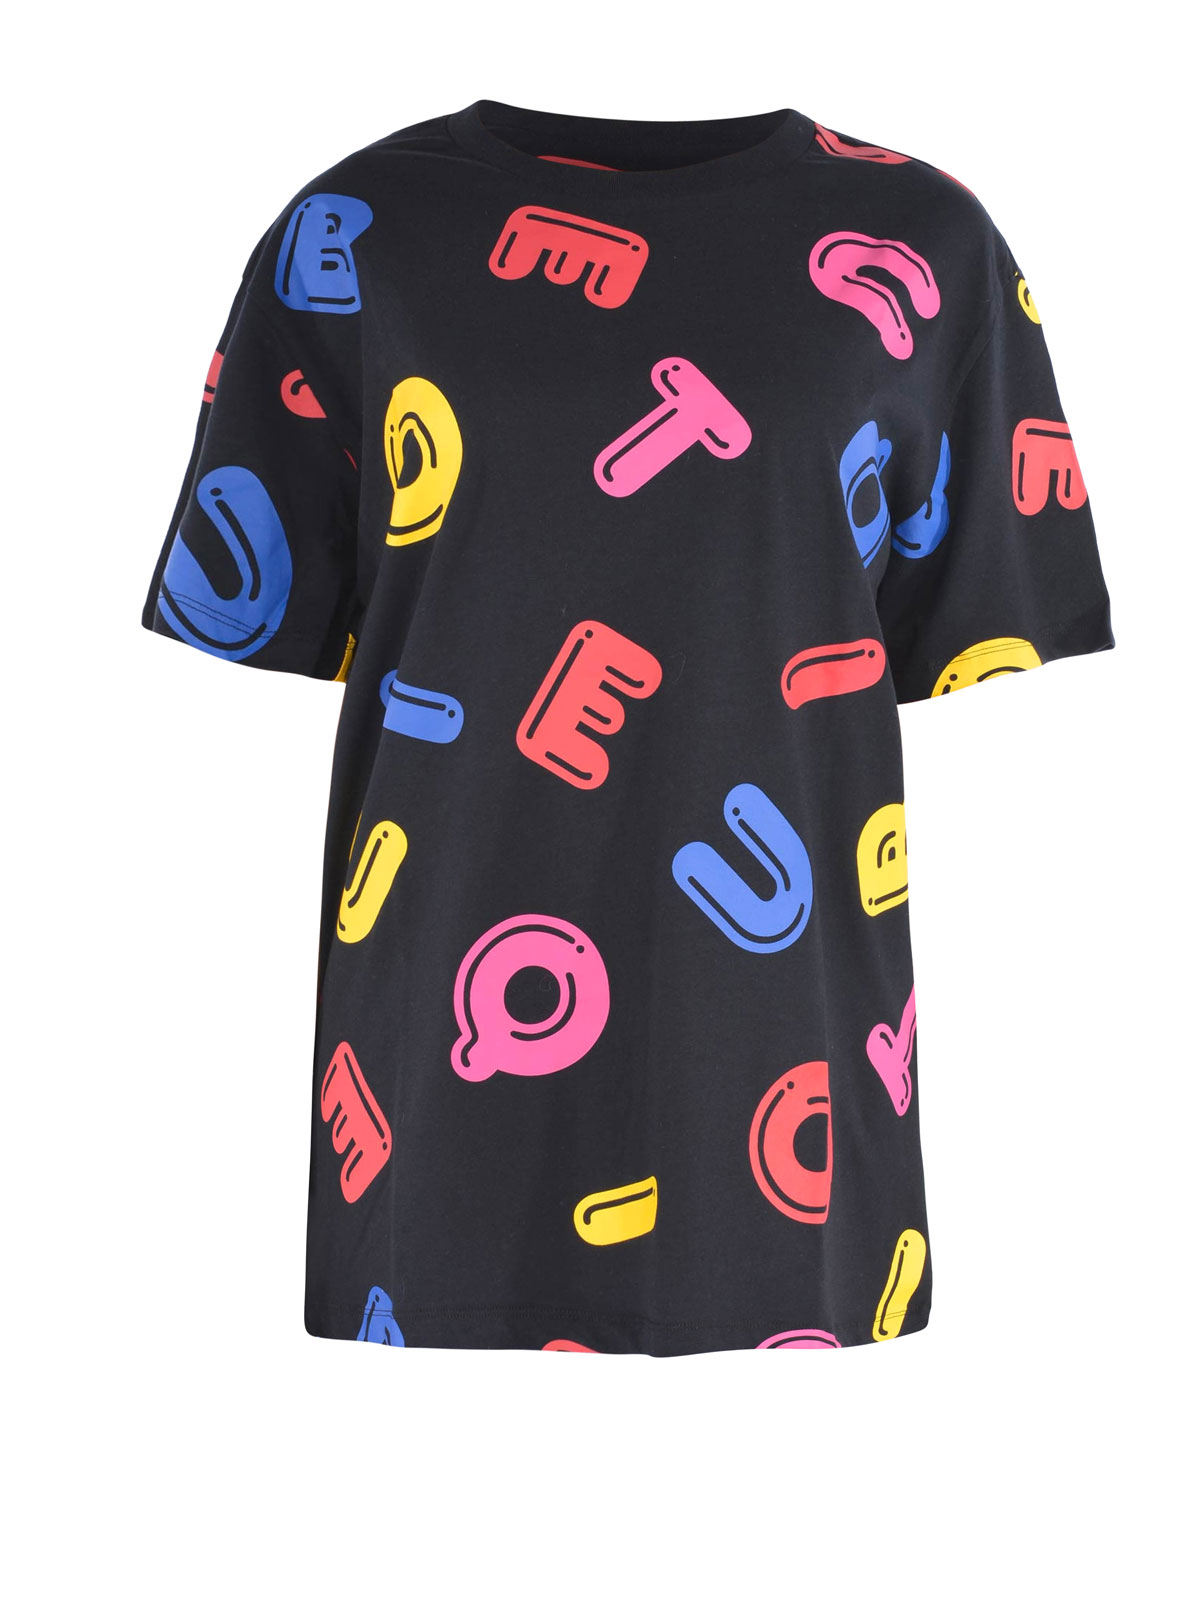 Moschino all over print t shirt, Oscar after party dresses 2019, mens faux leather jacket with hood. 